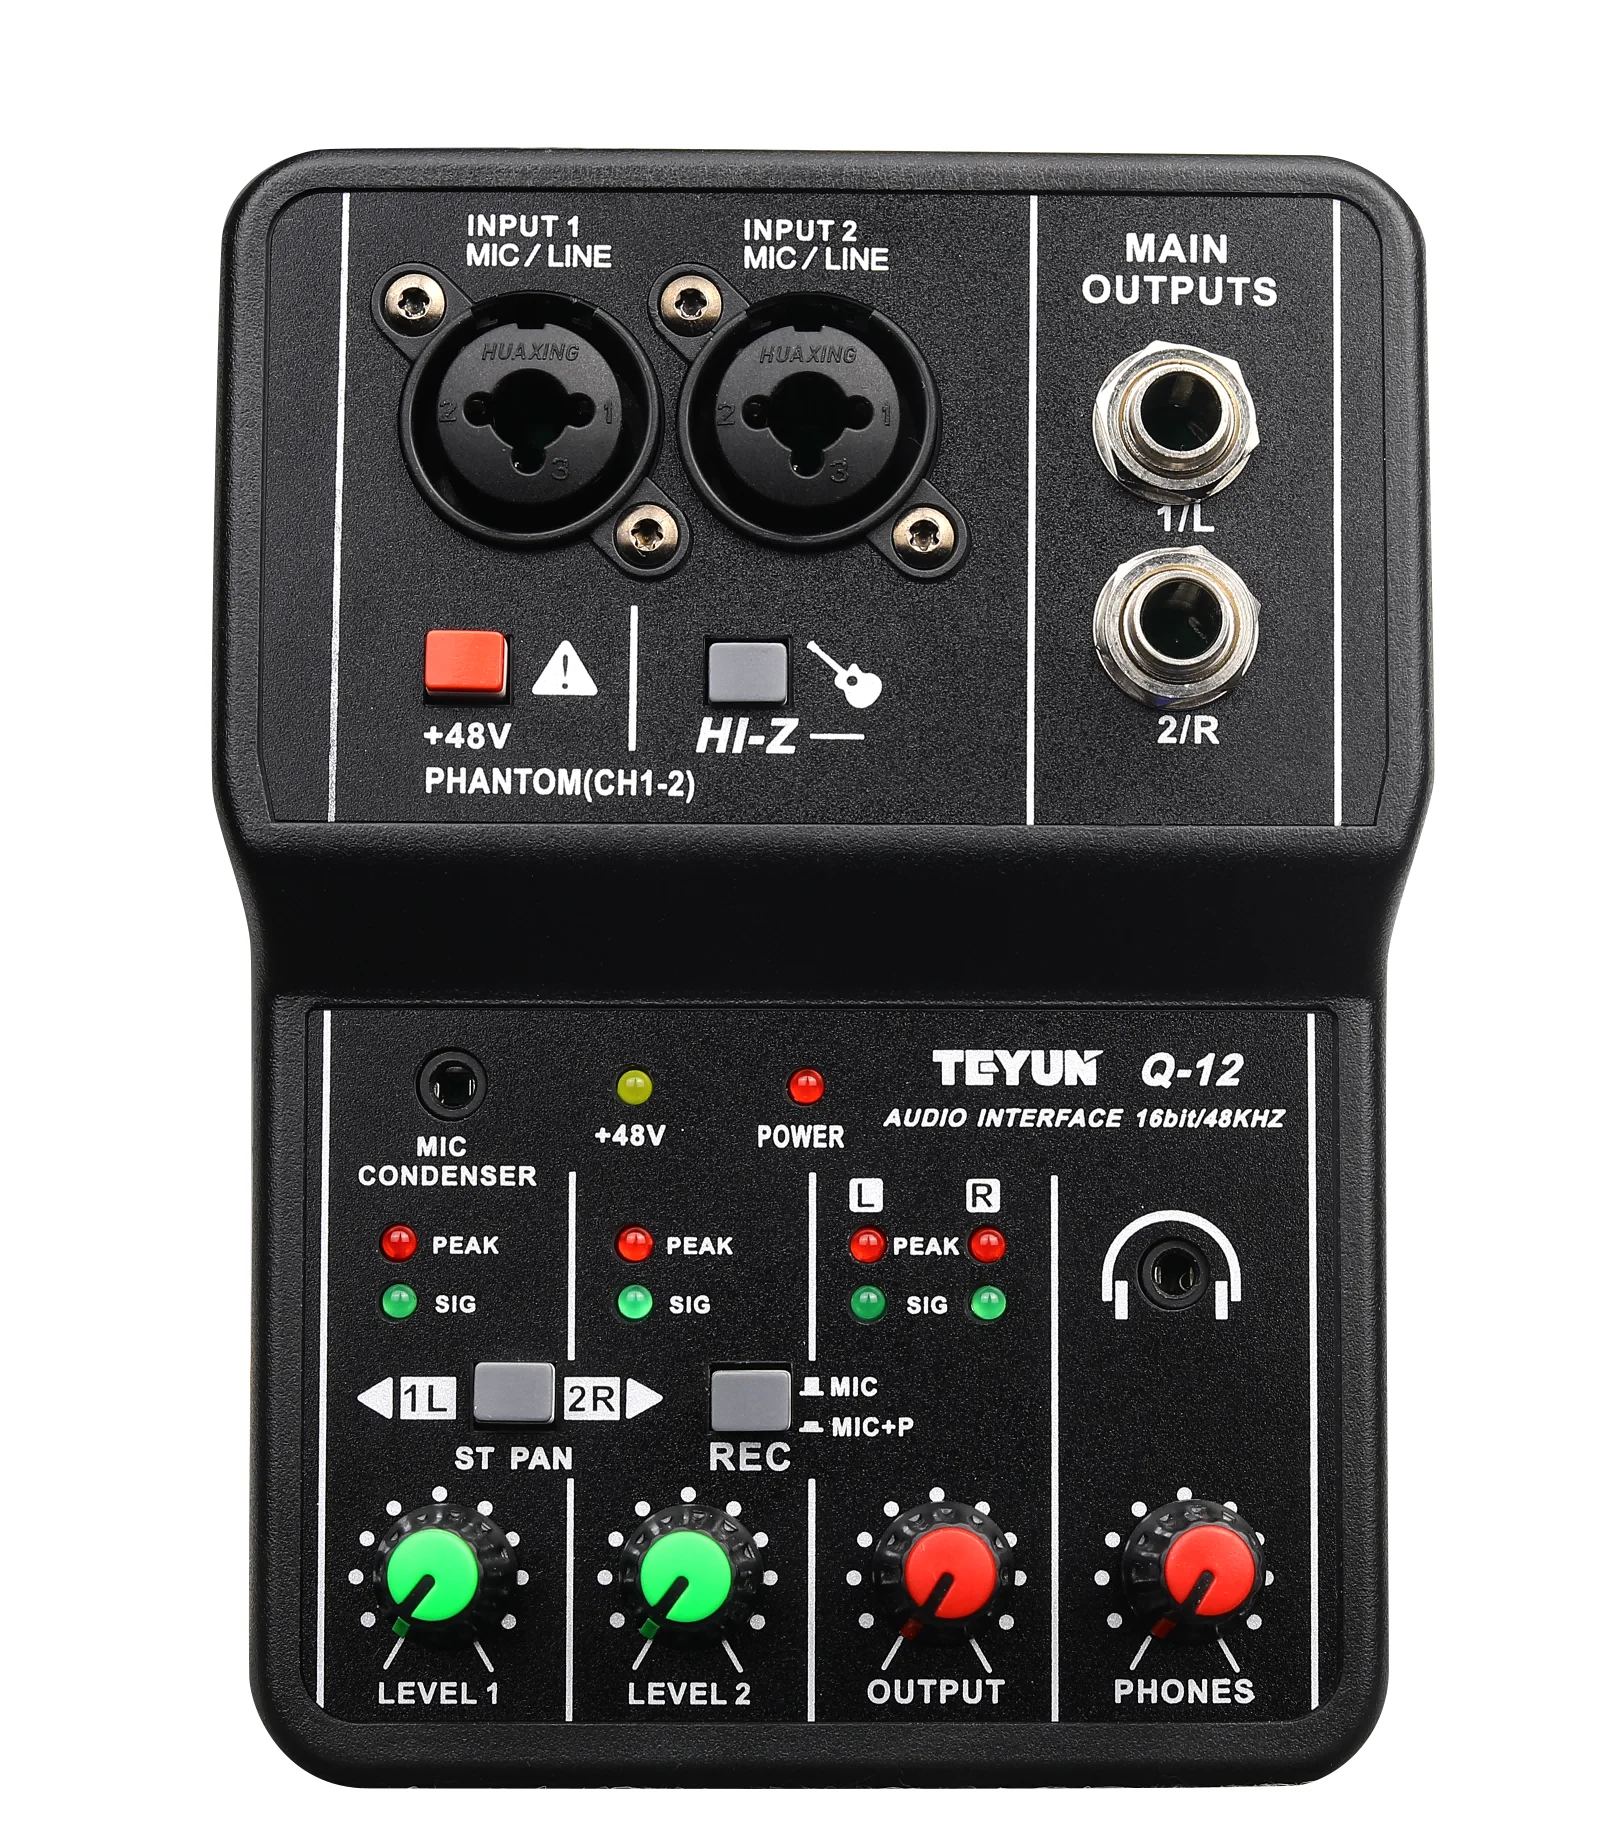 

Mini Audio Mixer Sound Card with Monitor Electric Guitar Live Broadcast Recording for Studio Singing Computer PC TEYUN Q-12